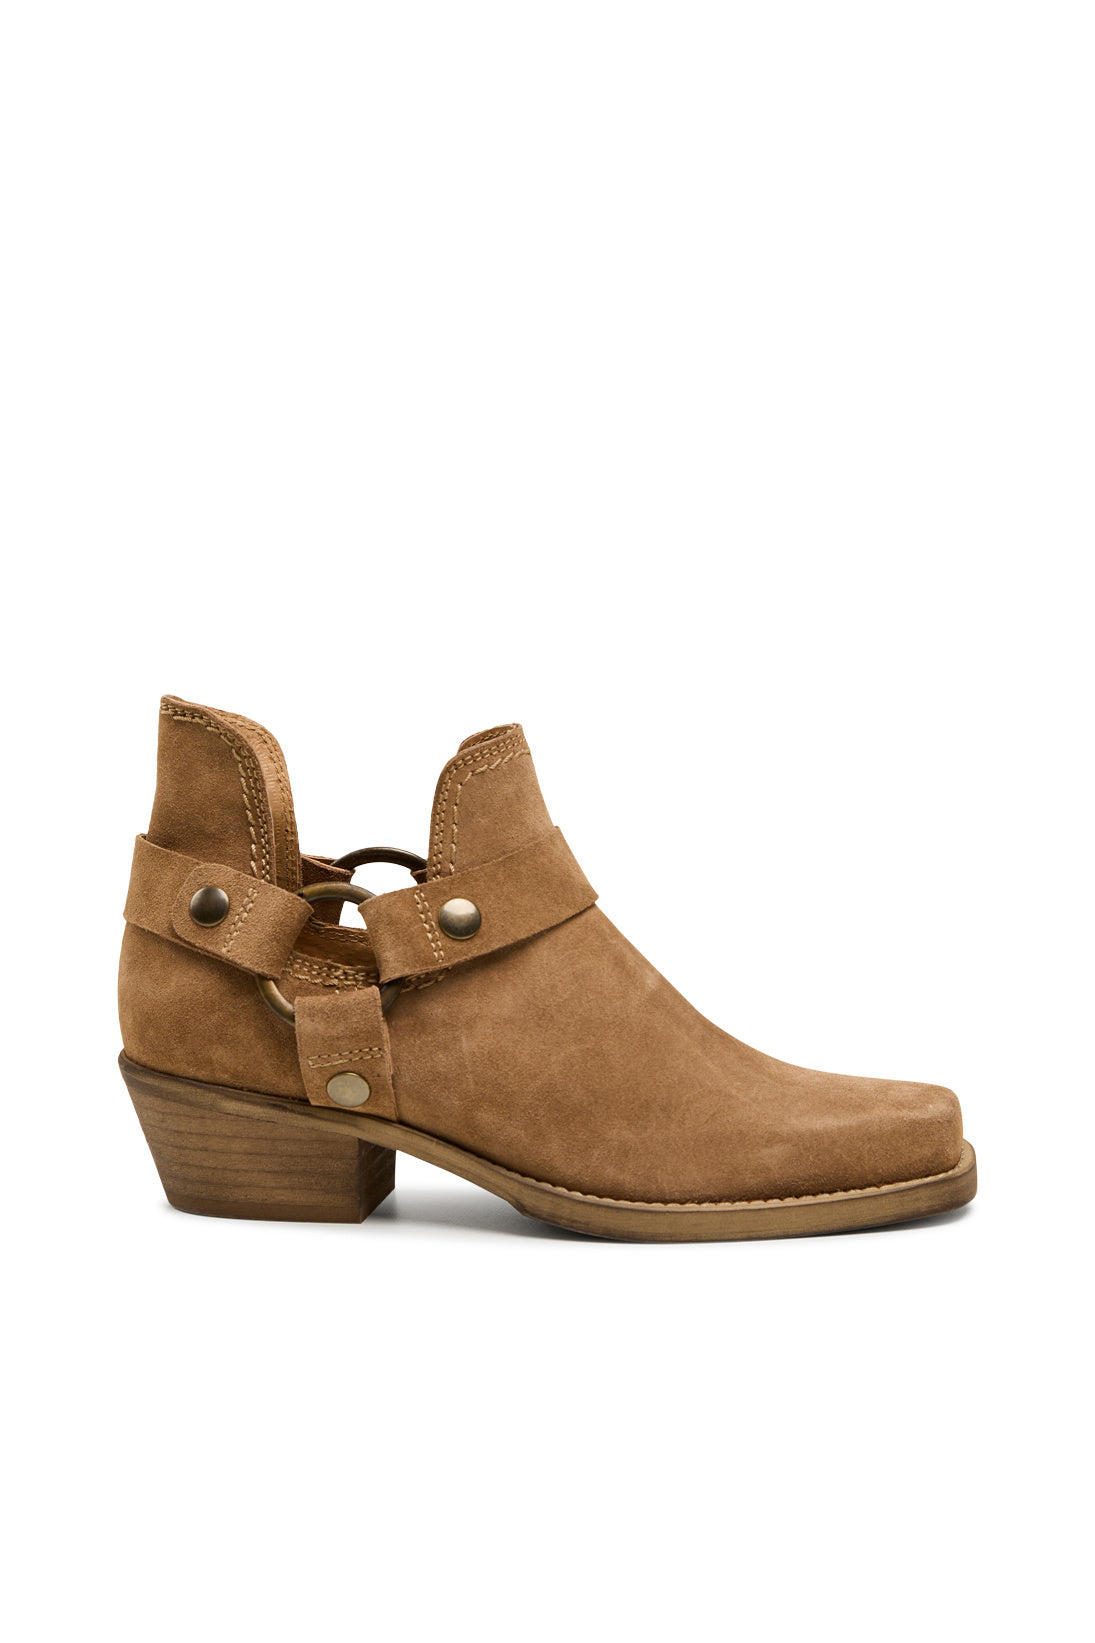 Pavement Lauryn Leather Boot - Taupe Suede - RUM Amsterdam